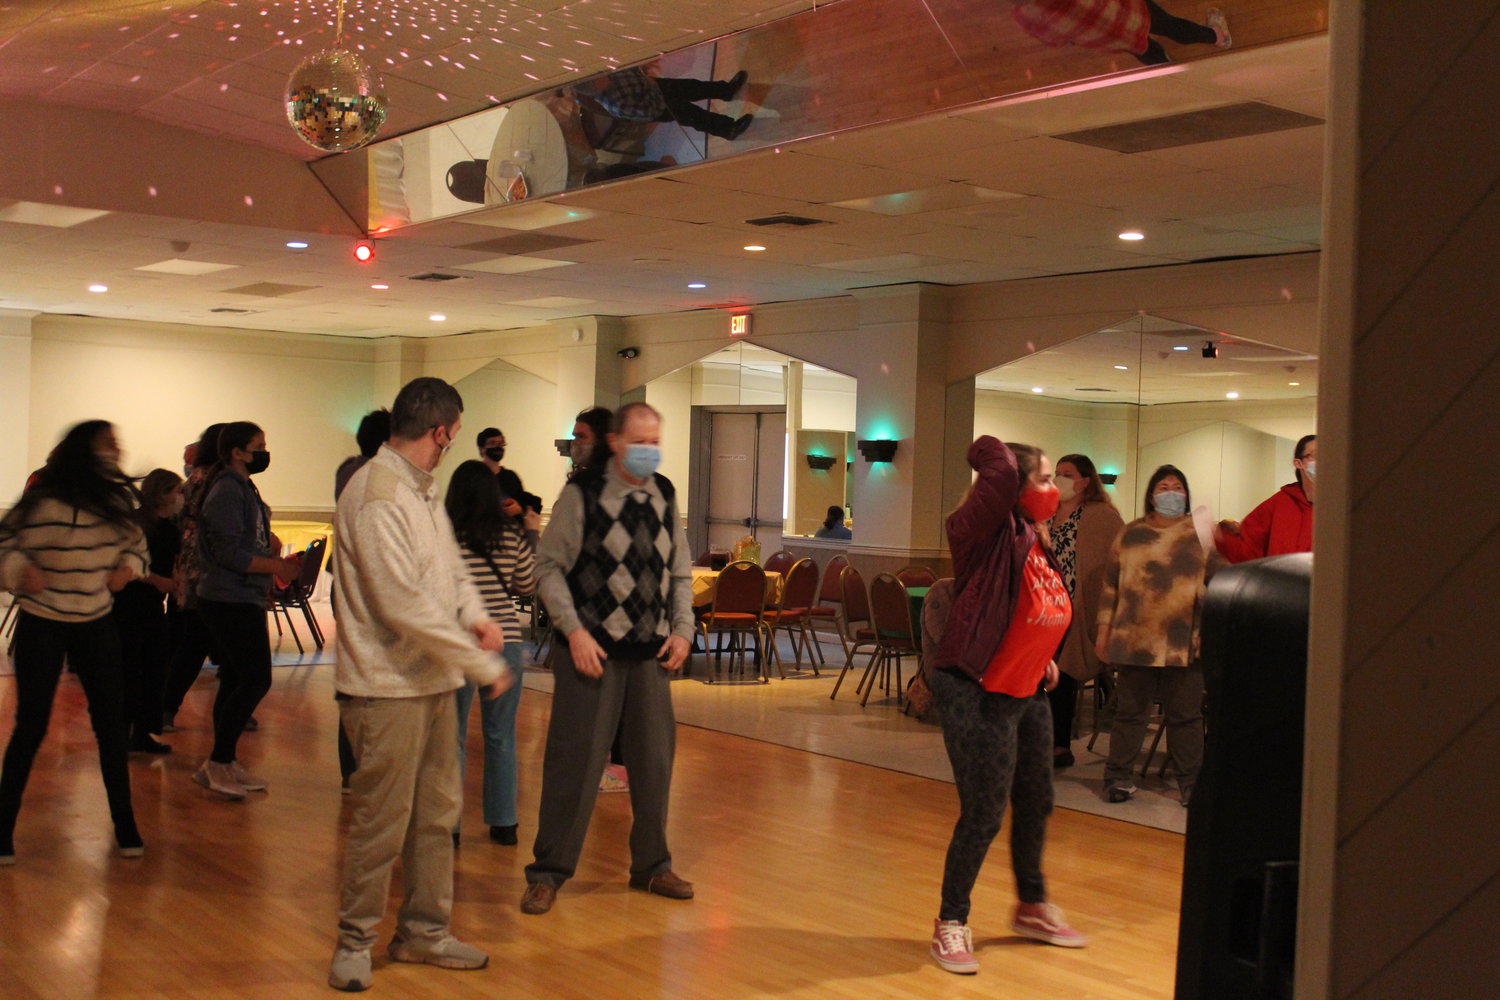 ANCHOR teens and adults dance in the banquet hall of the American Legion Post 854.